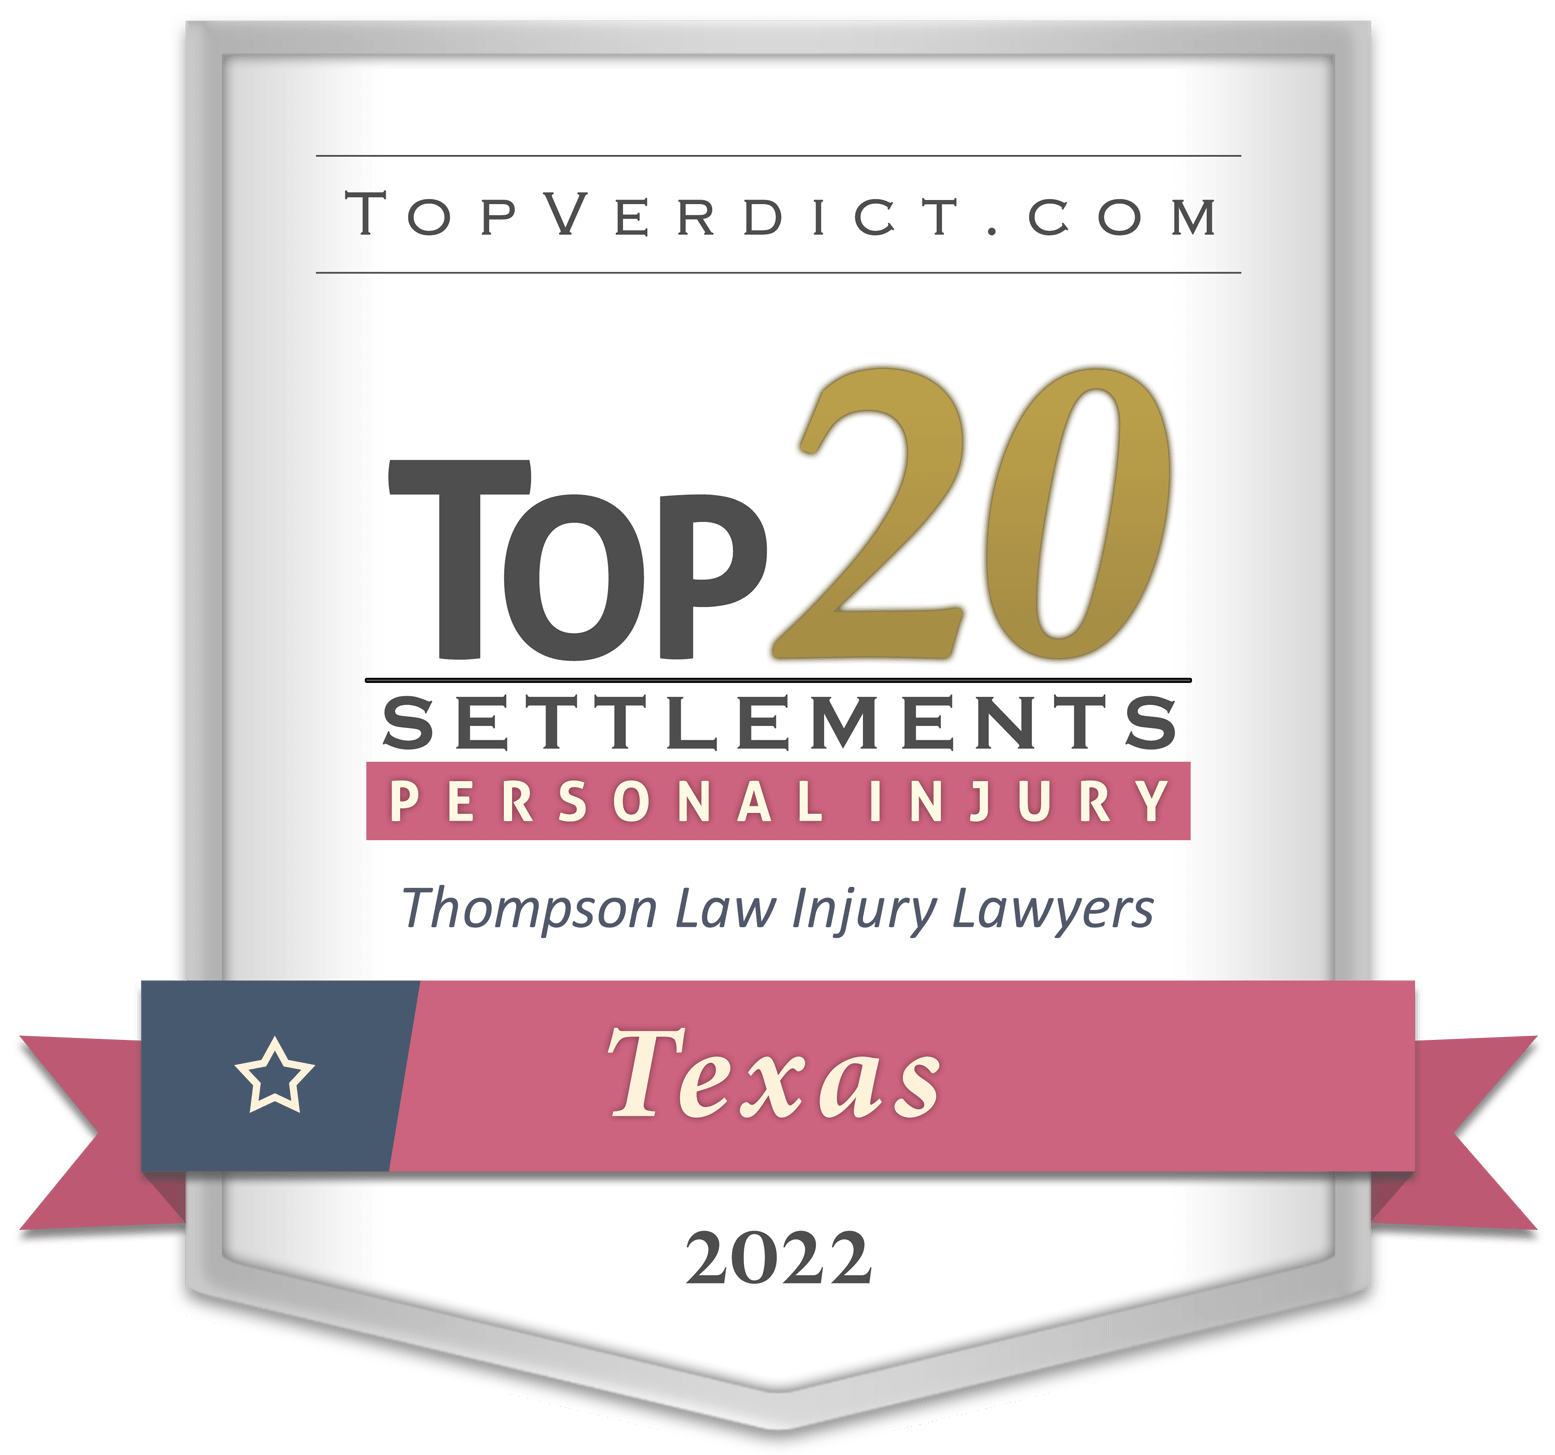 TopVerdict Top 20 personal injury settlements in Texas 2022 badge - Richardson Personal Injury Law Firm